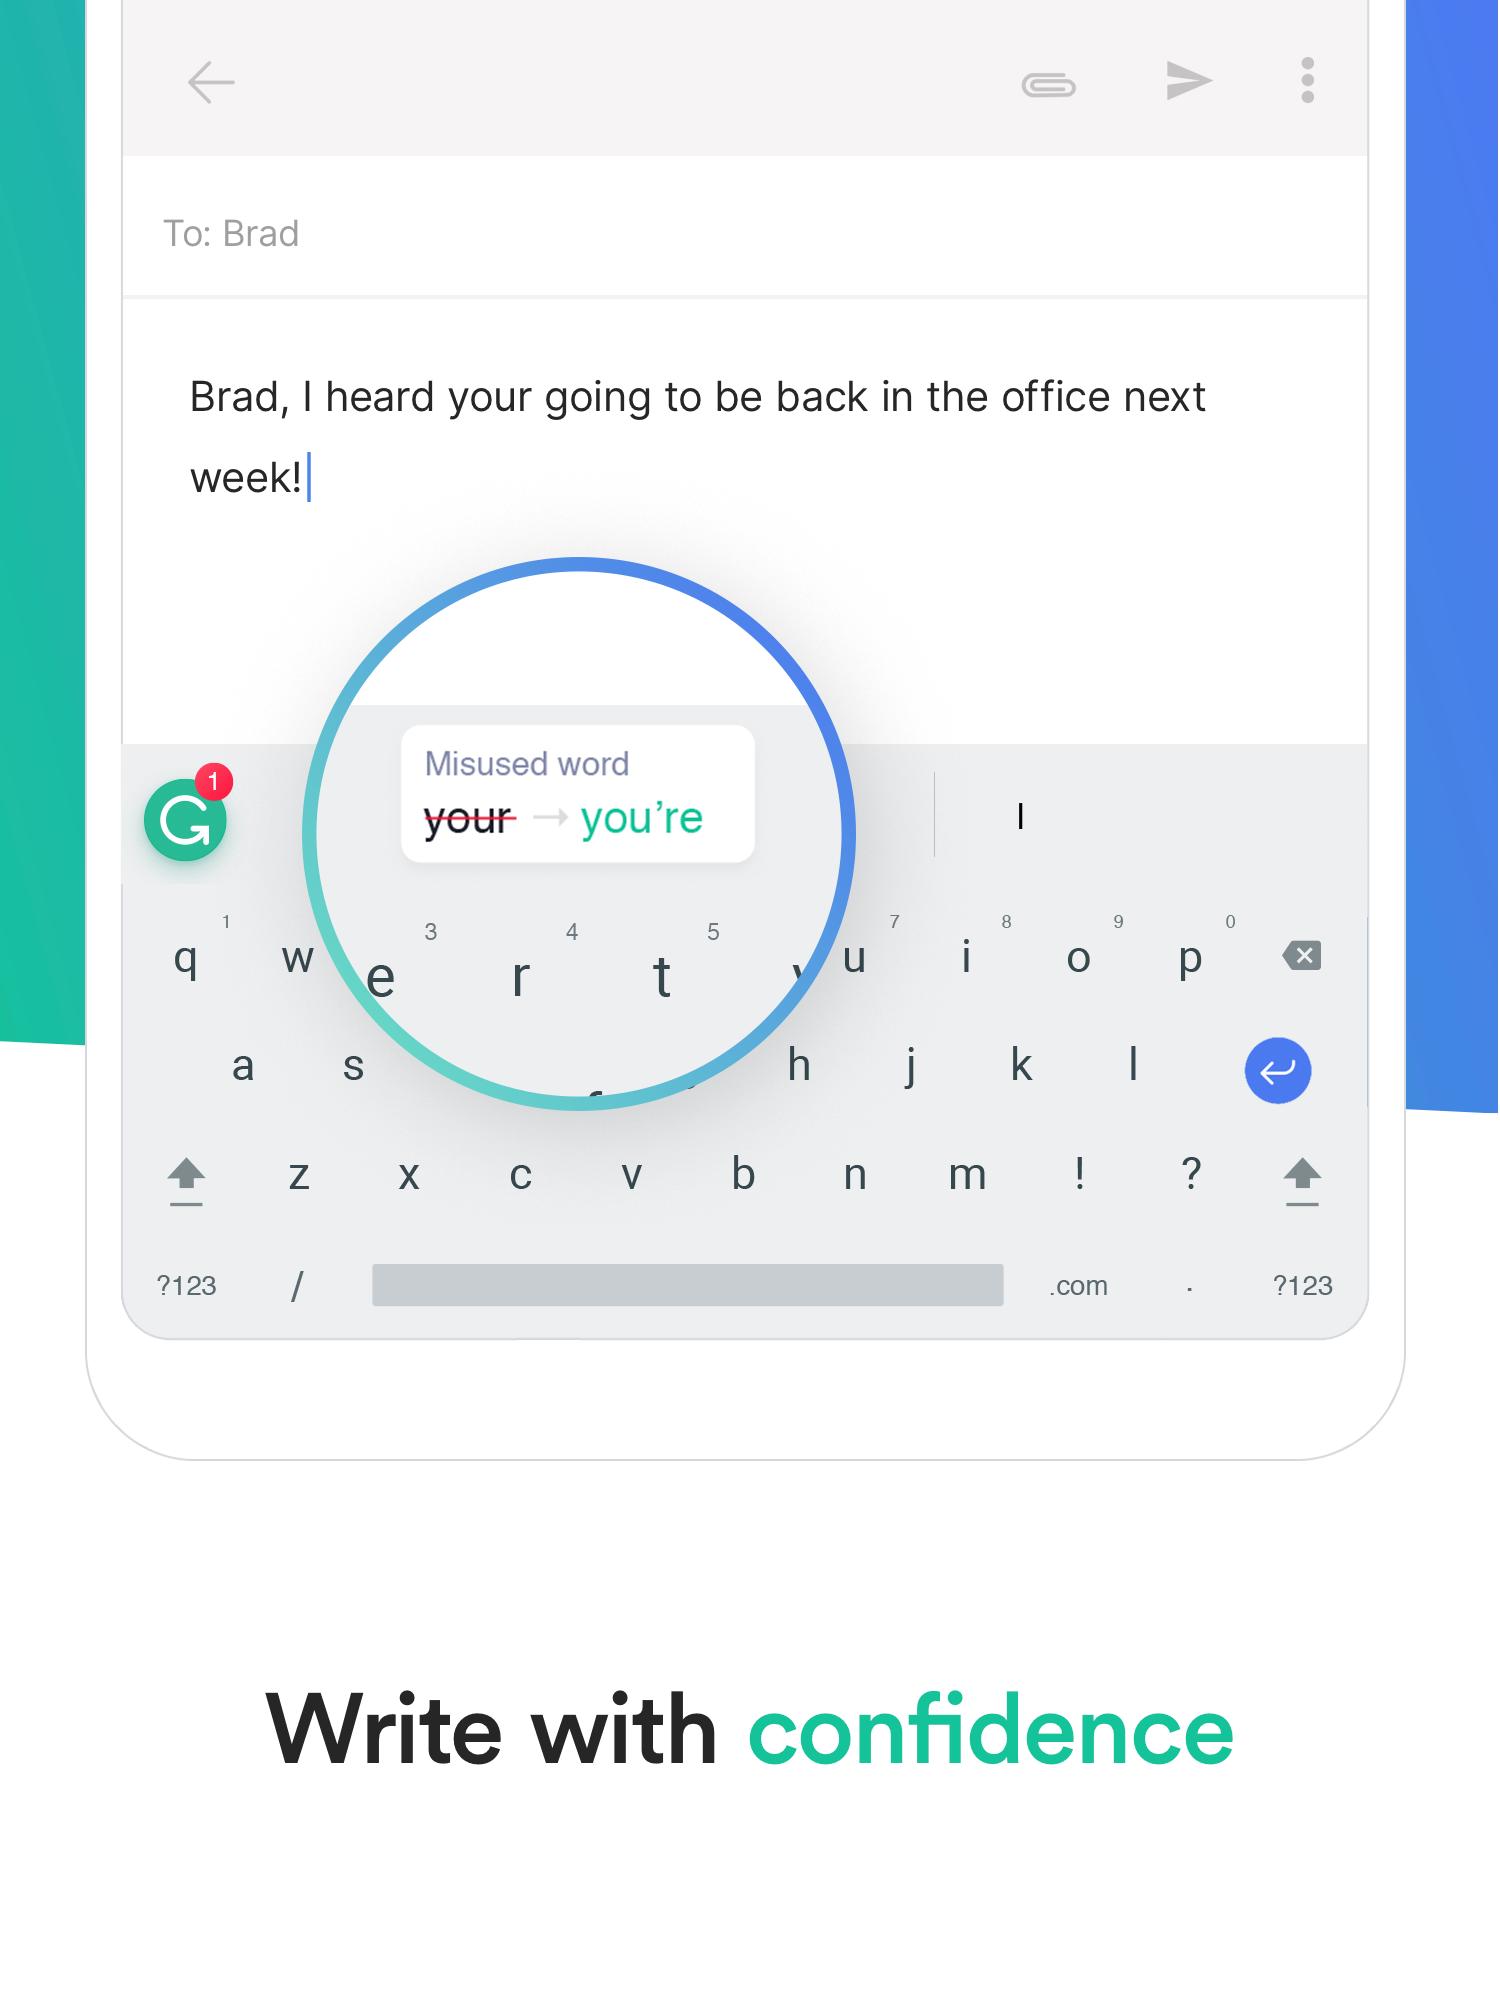 Grammarly Keyboard — Type with confidence 1.4.0.7 Screenshot 7